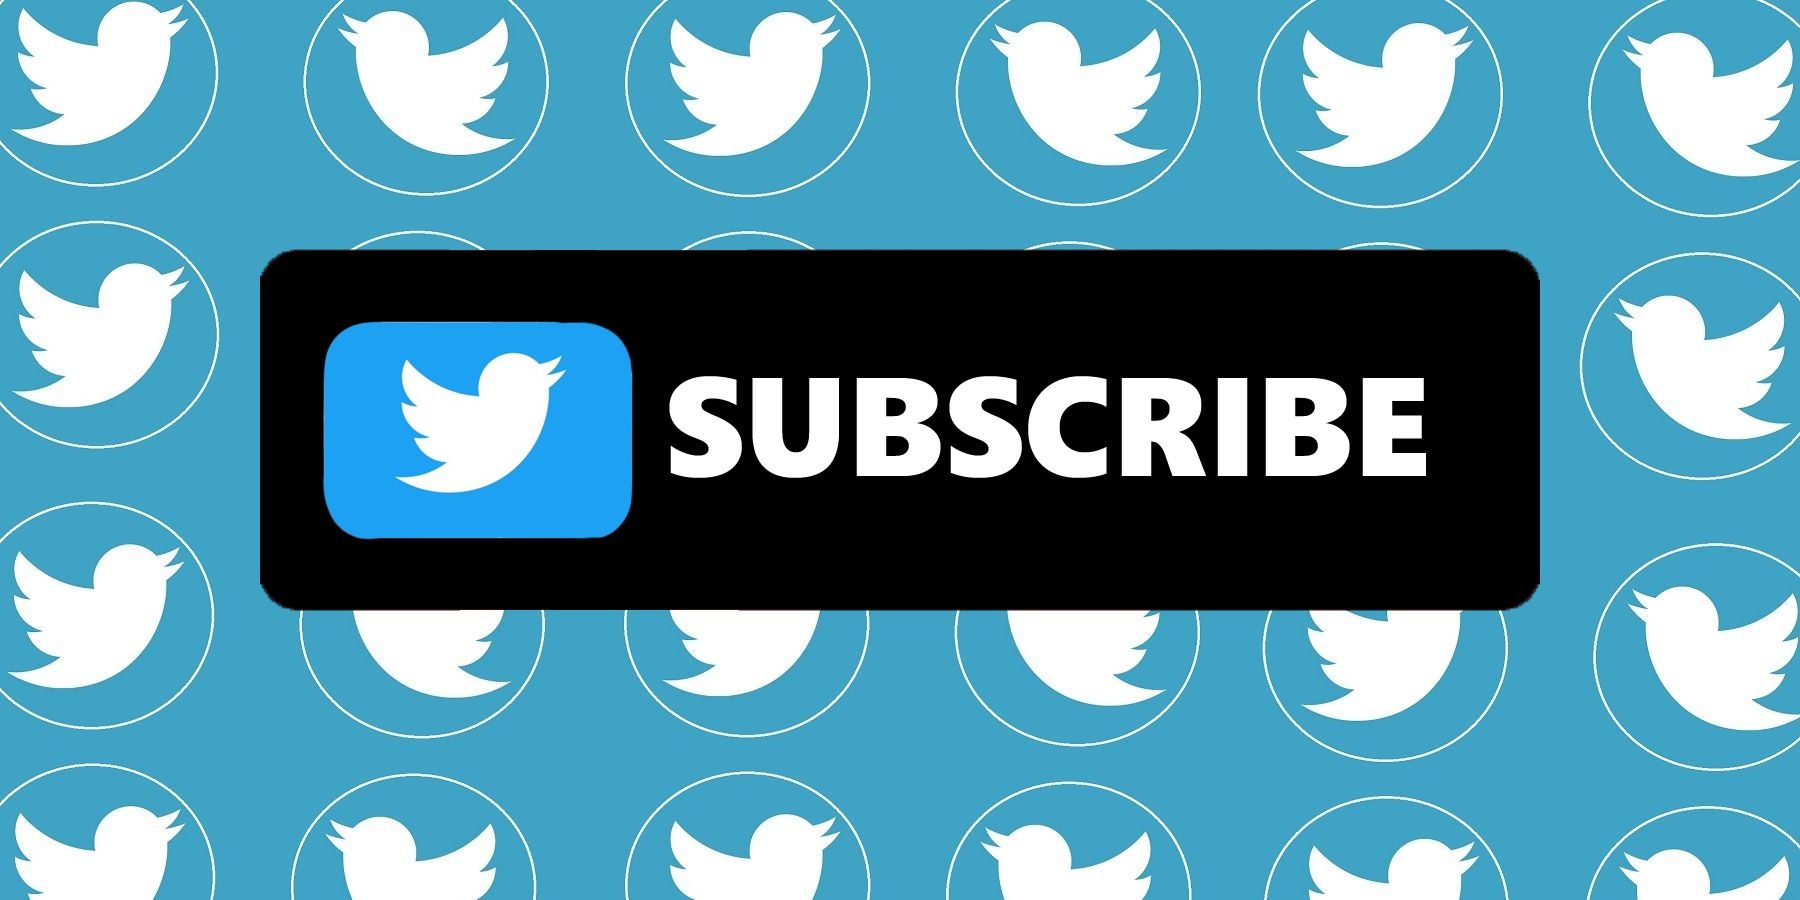 Twitter logos and subscribe button